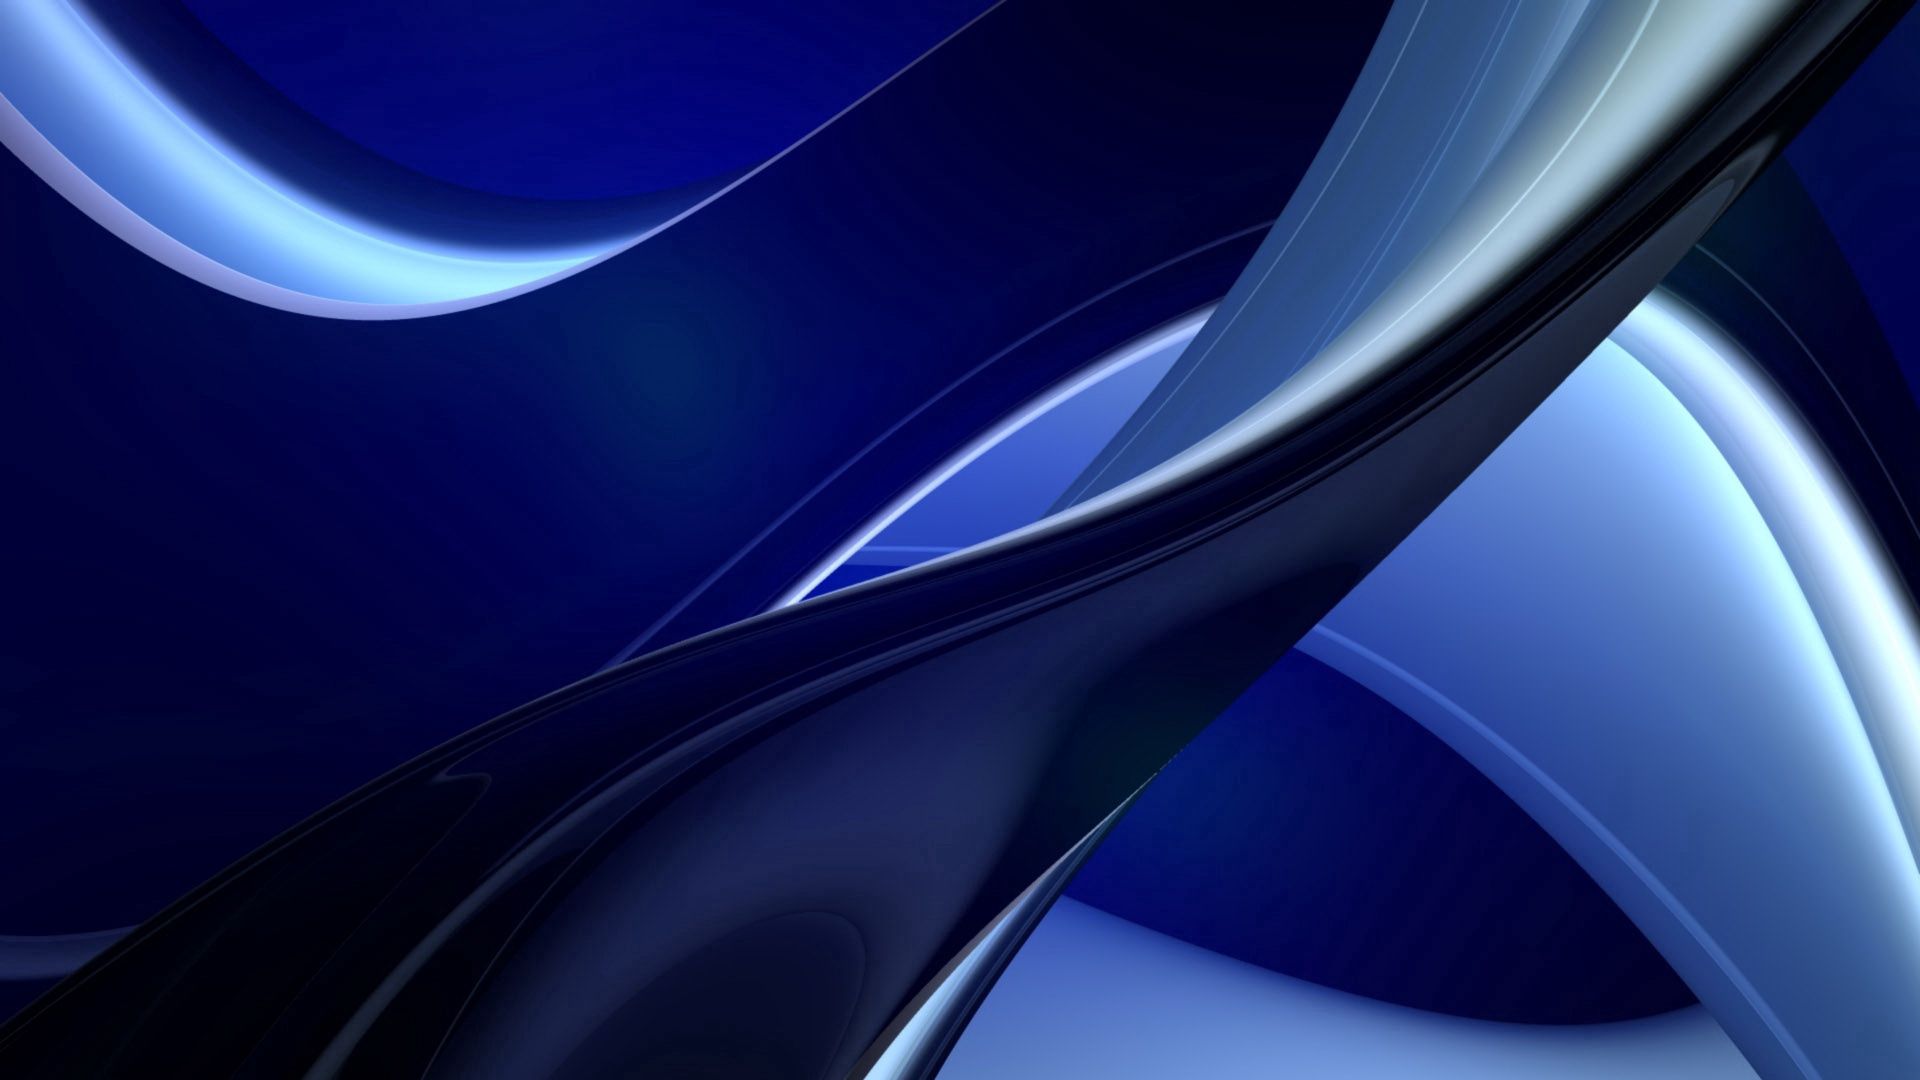 Download wallpaper 1920x1080 blue, alloy, line, drawing, abstraction ...